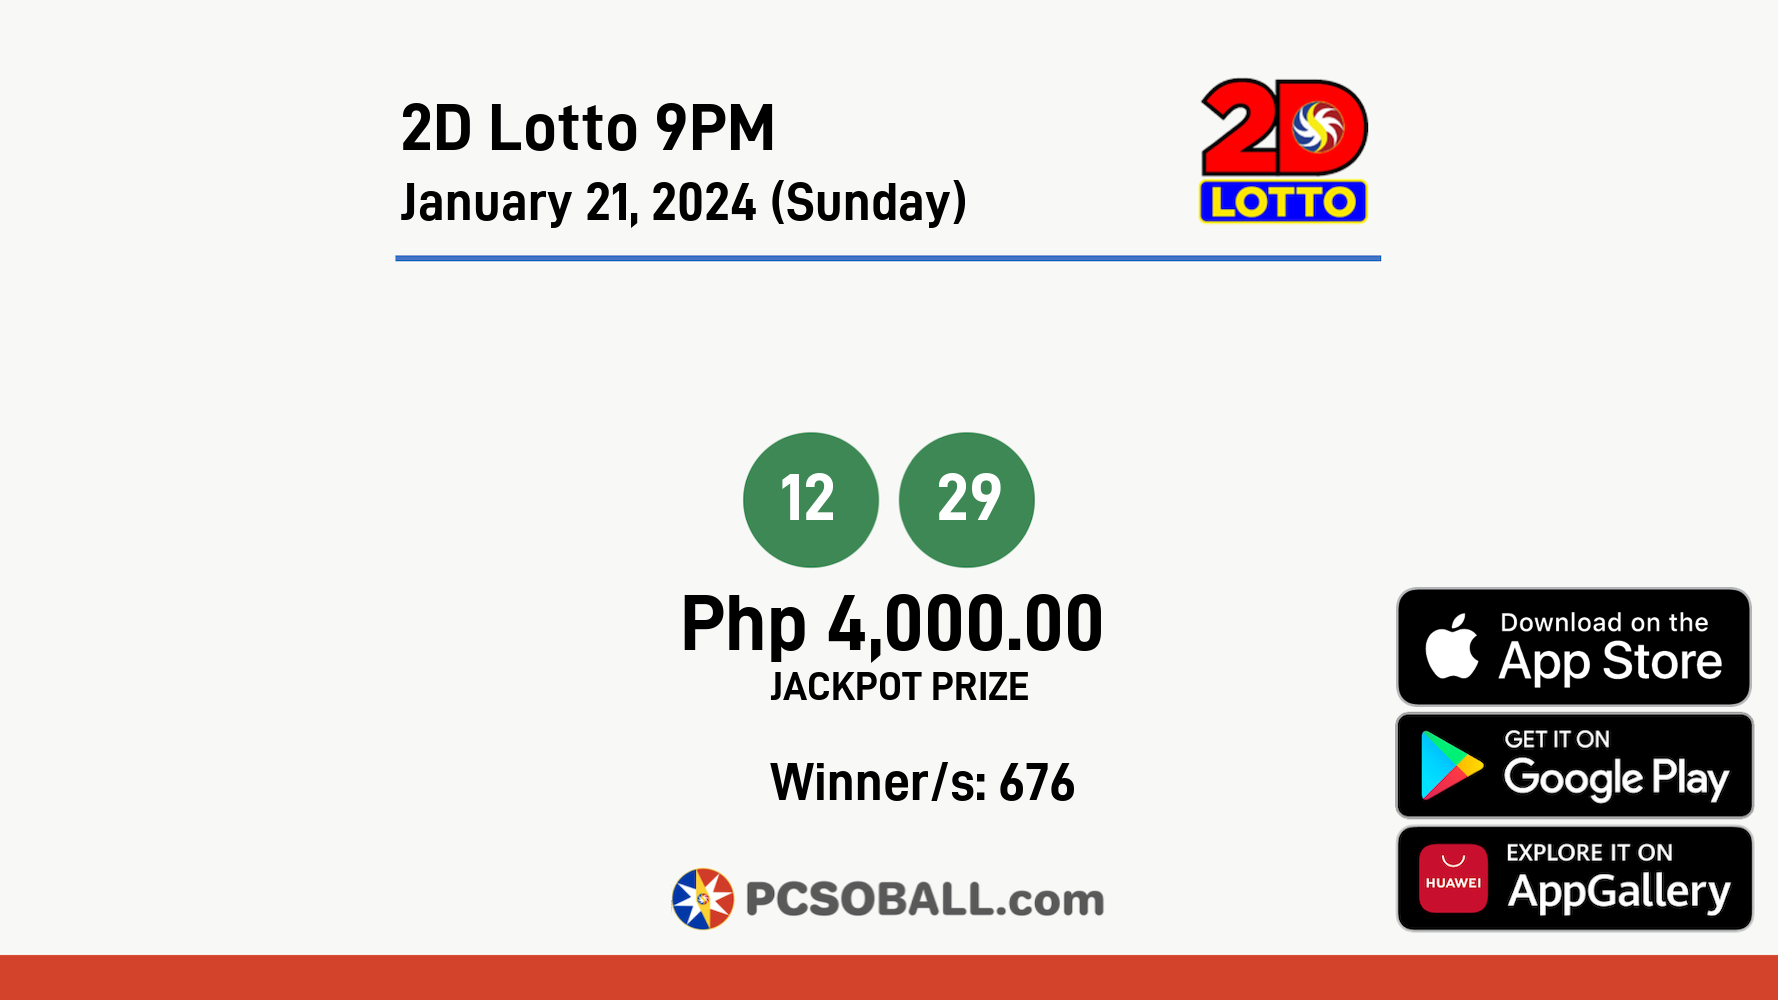 2D Lotto 9PM January 21, 2024 (Sunday) Result